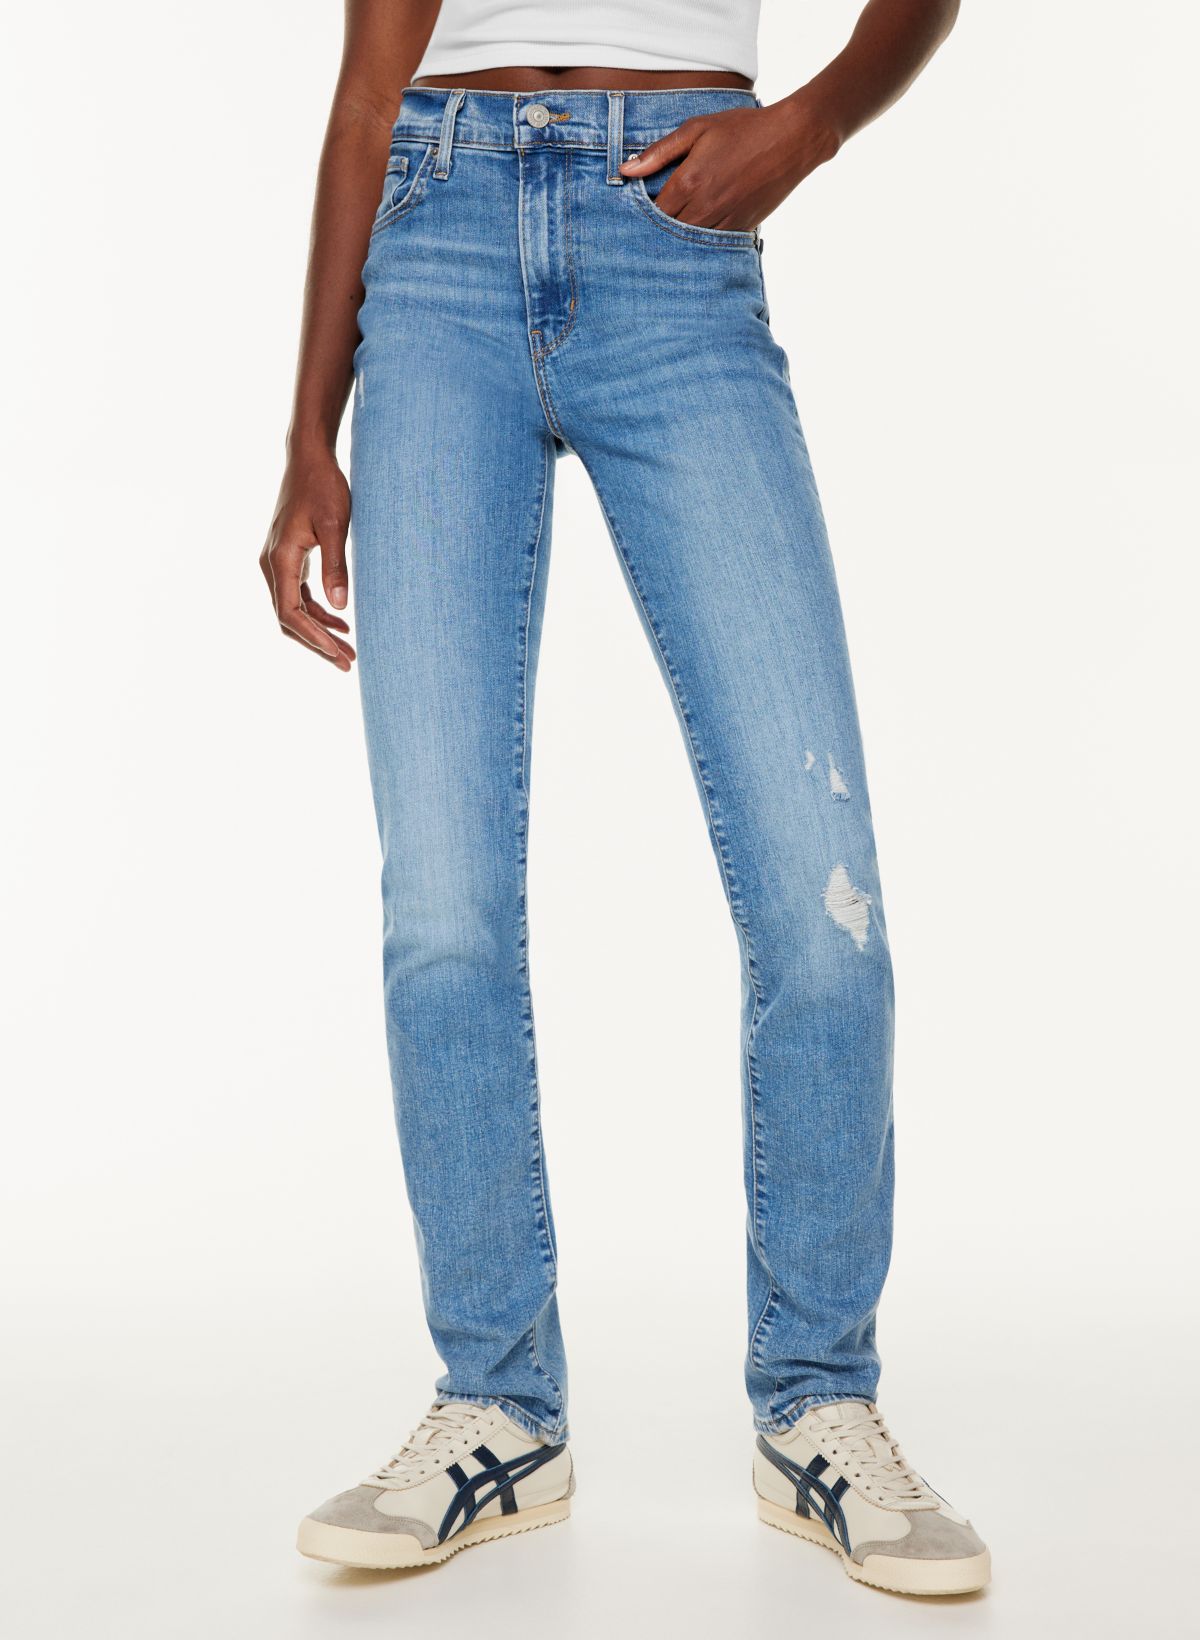 Levi's Women's 724 Straight Leg Jeans - Country Outfitter